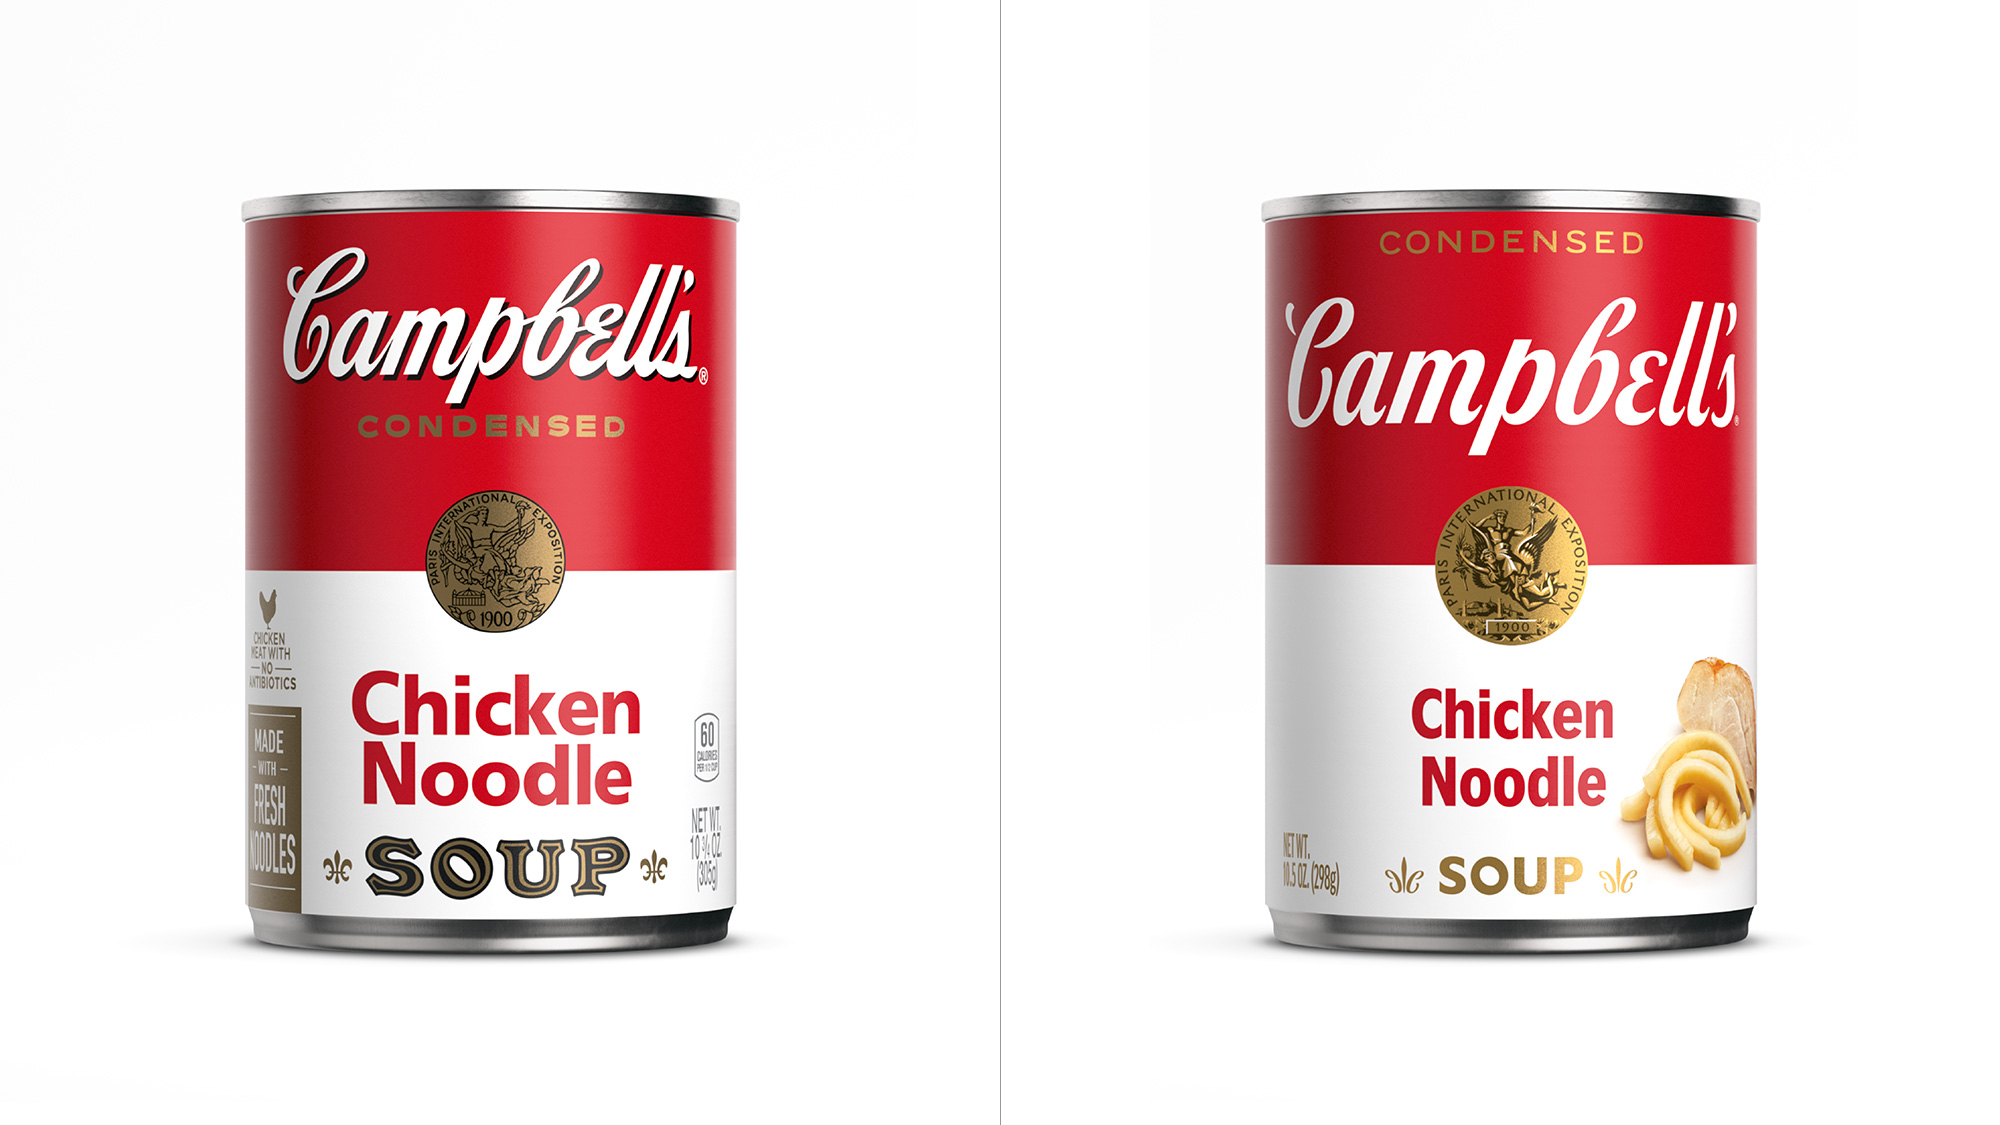 New Logo and Packaging for Campbell’s by Turner Duckworth and Ian Brignell